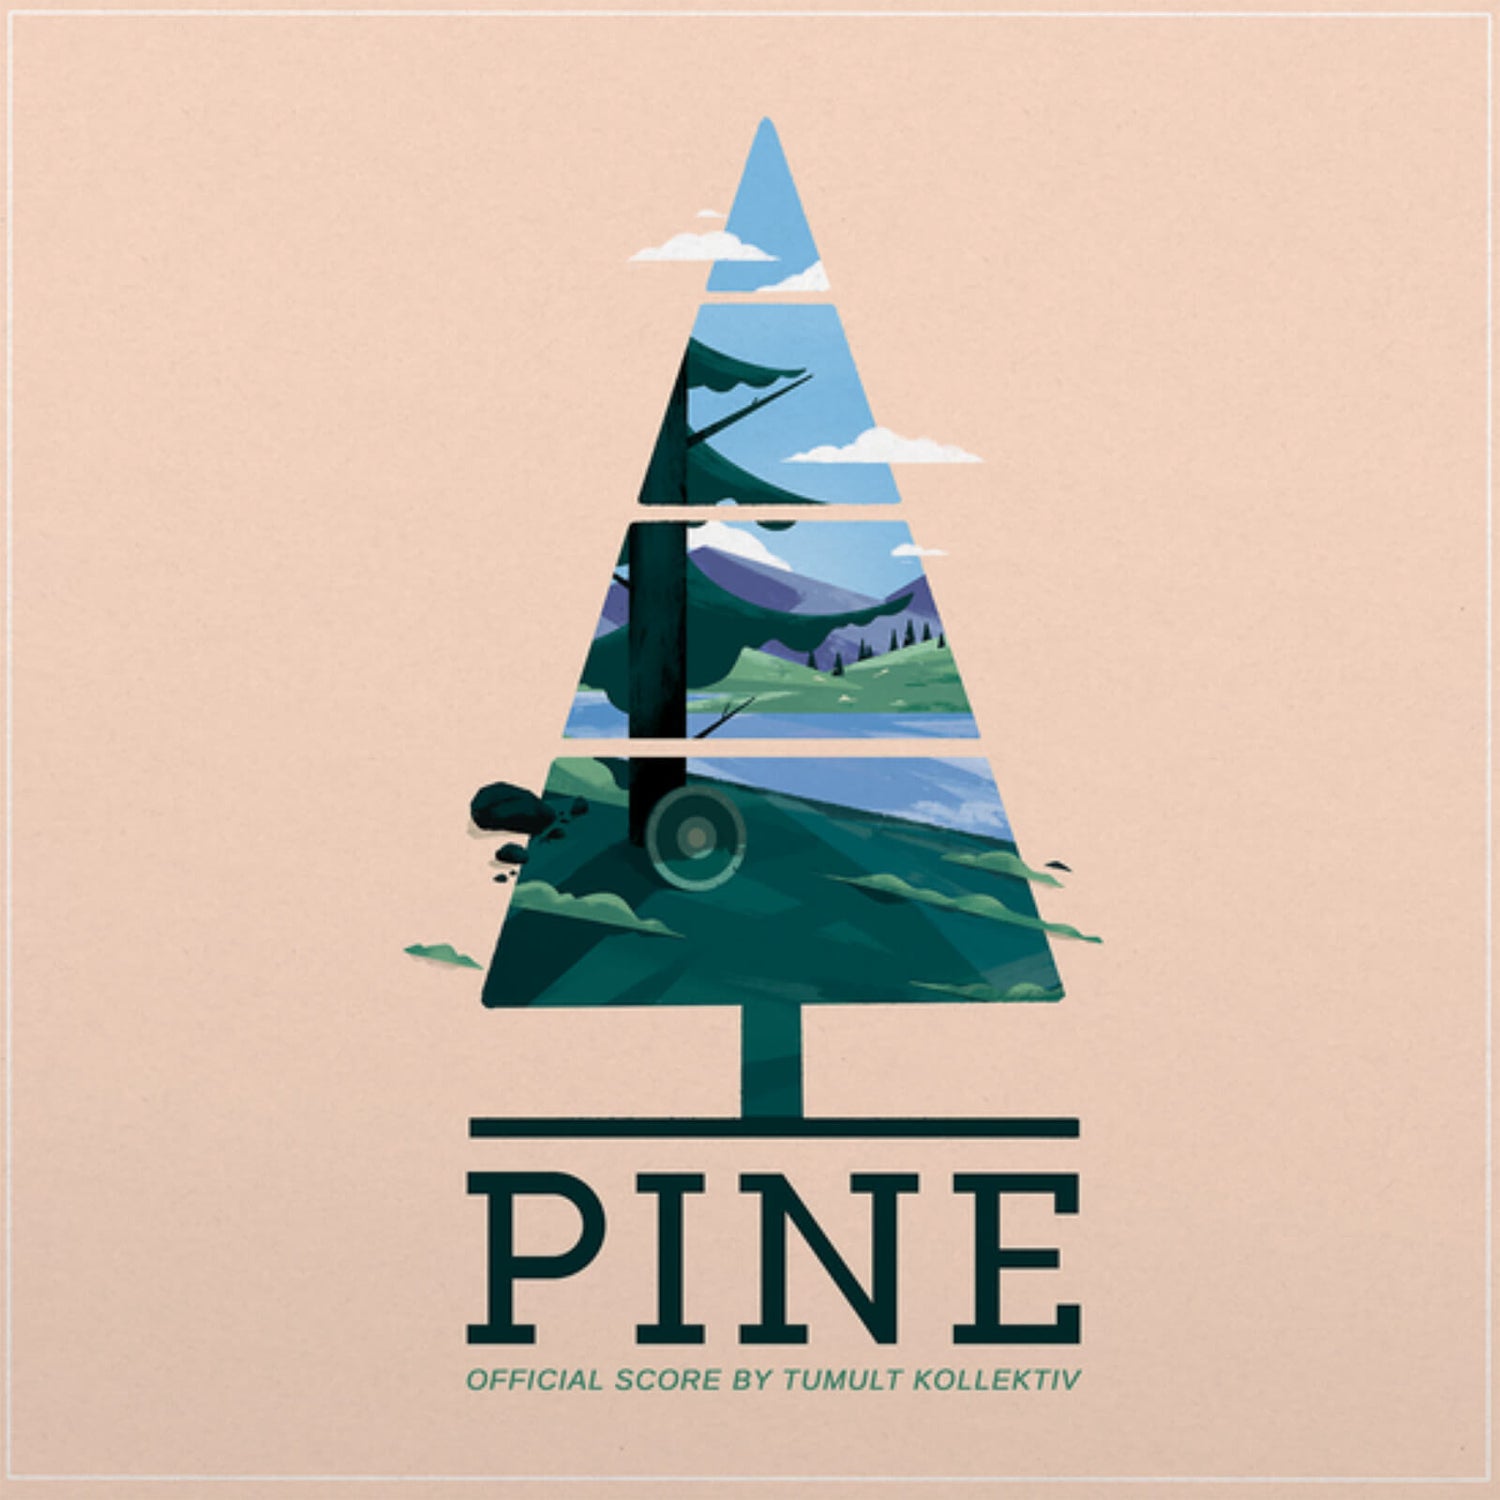 Pine (Official Score) 140g Vinyl (Transparent Turquoise And Green)